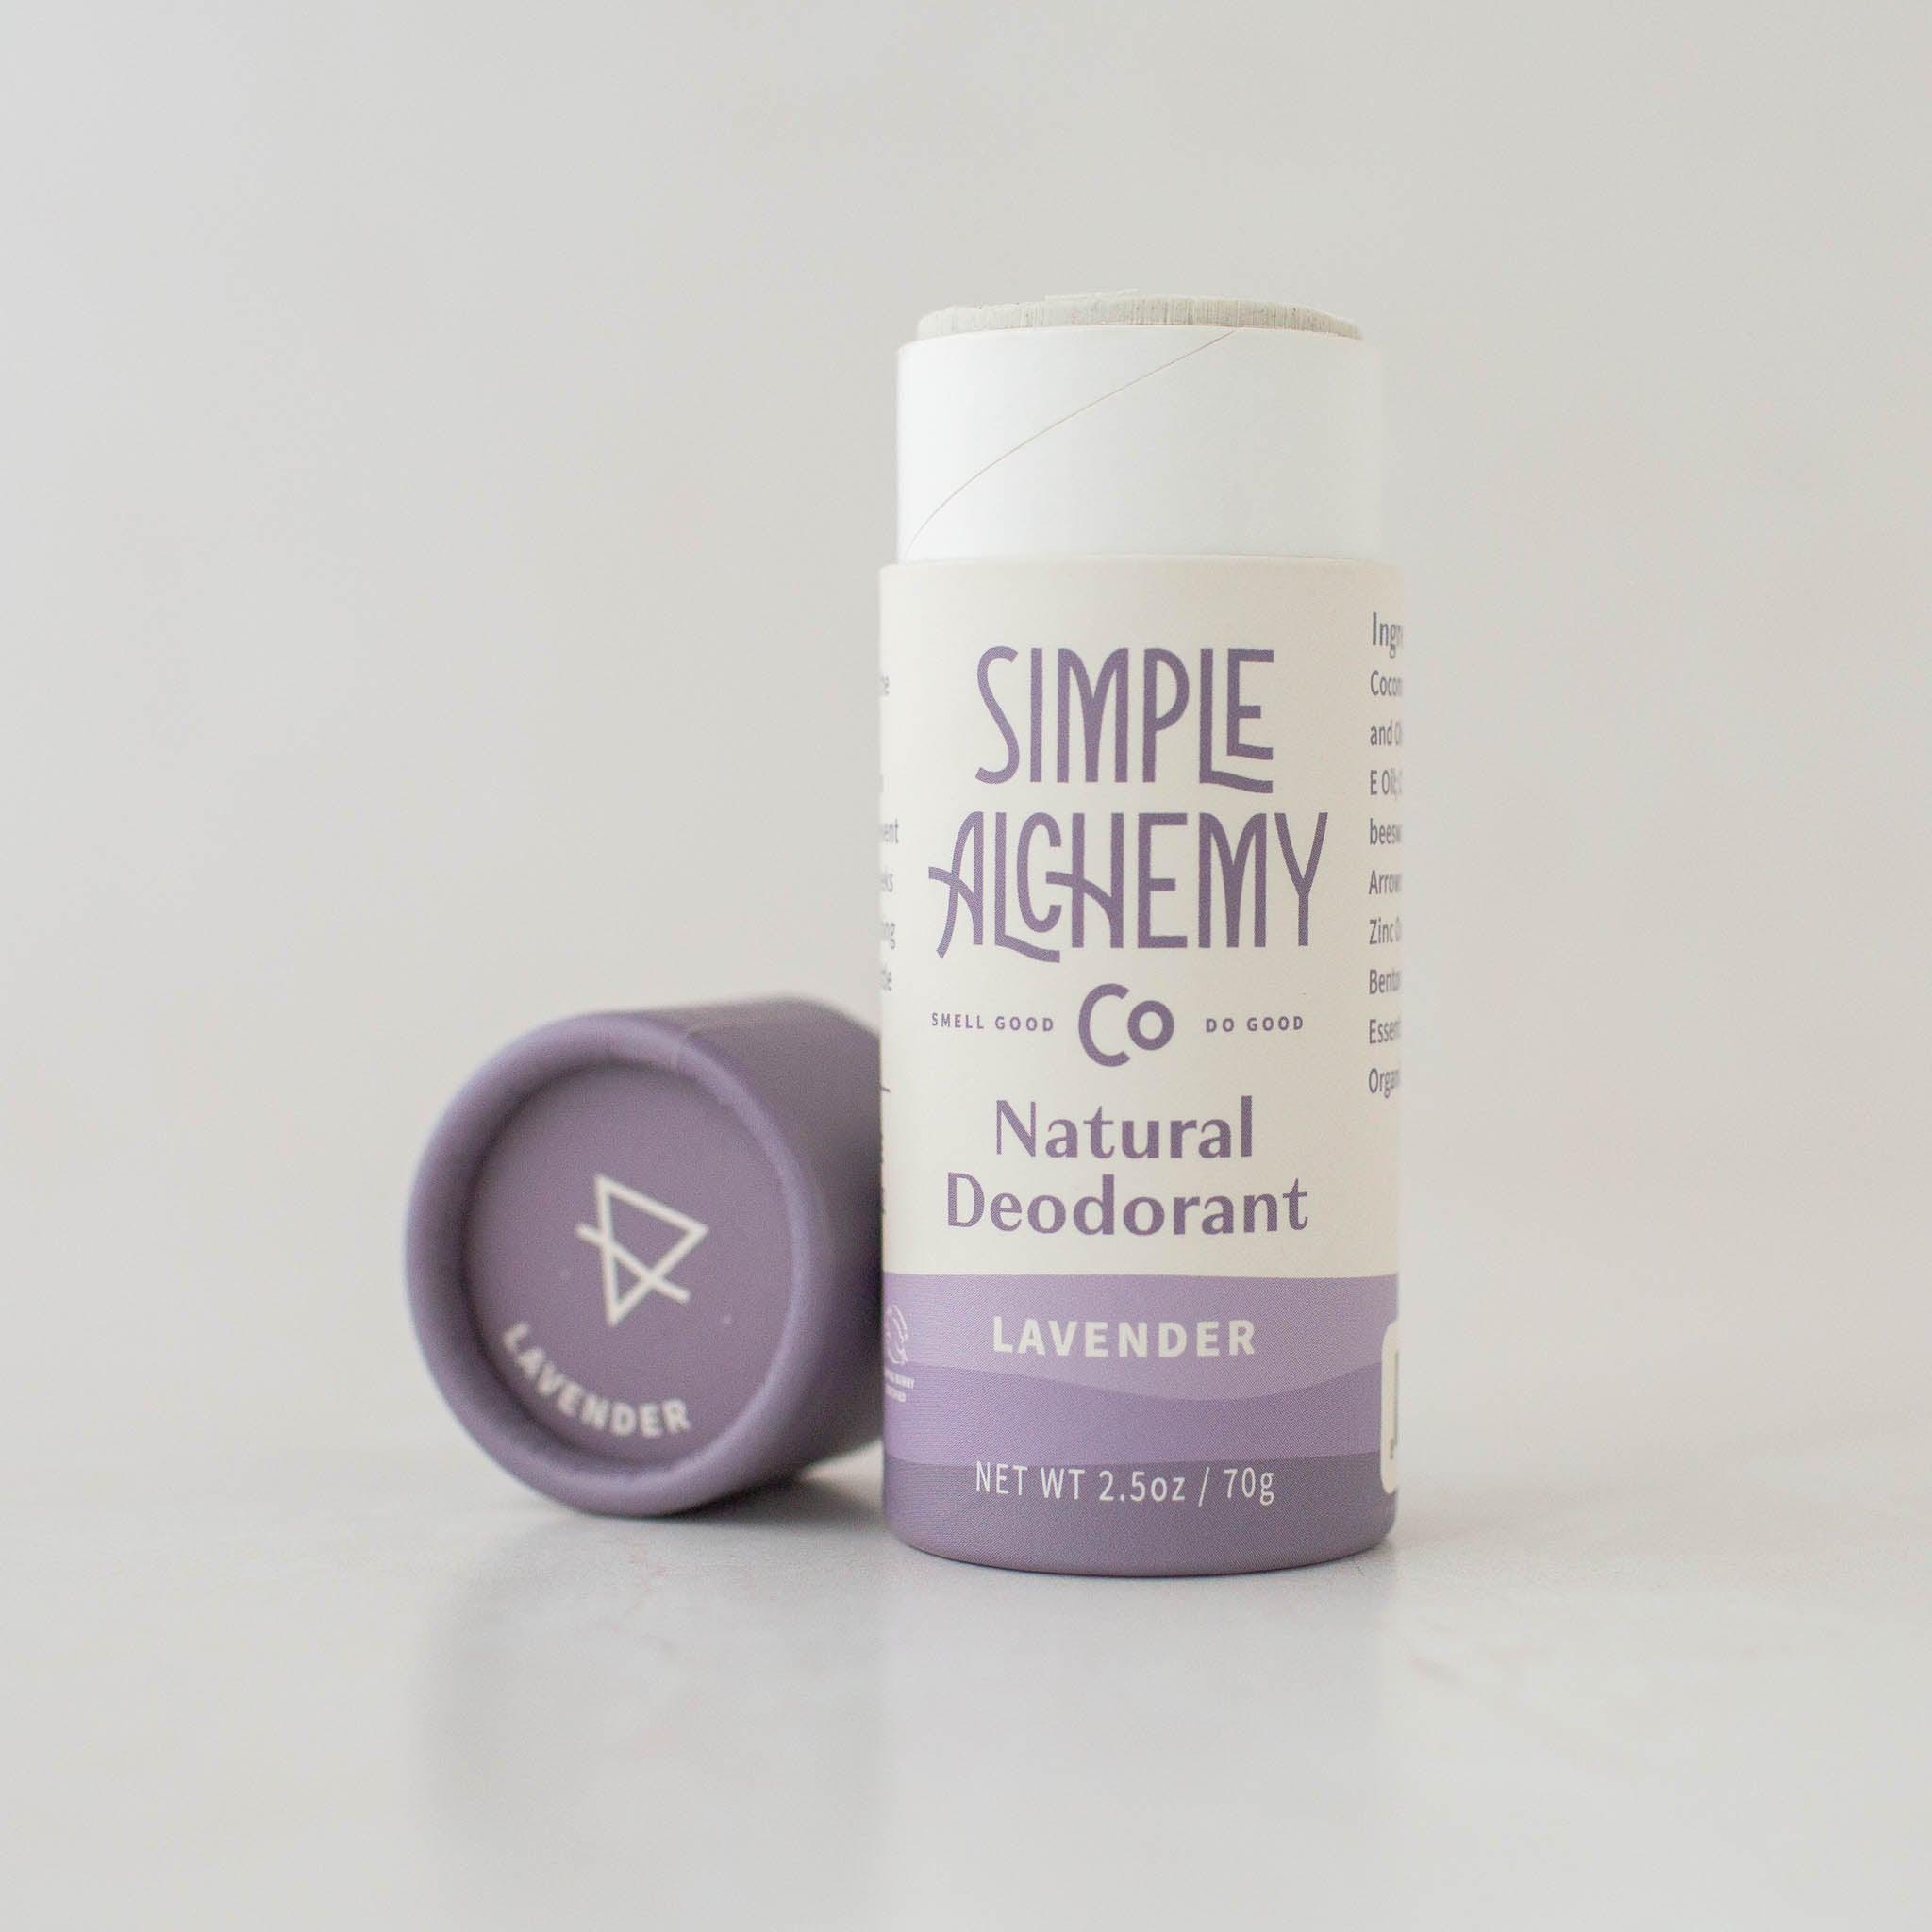 Cream and purple compostable tube of Lavender Natural Deodorant, with cap removed.